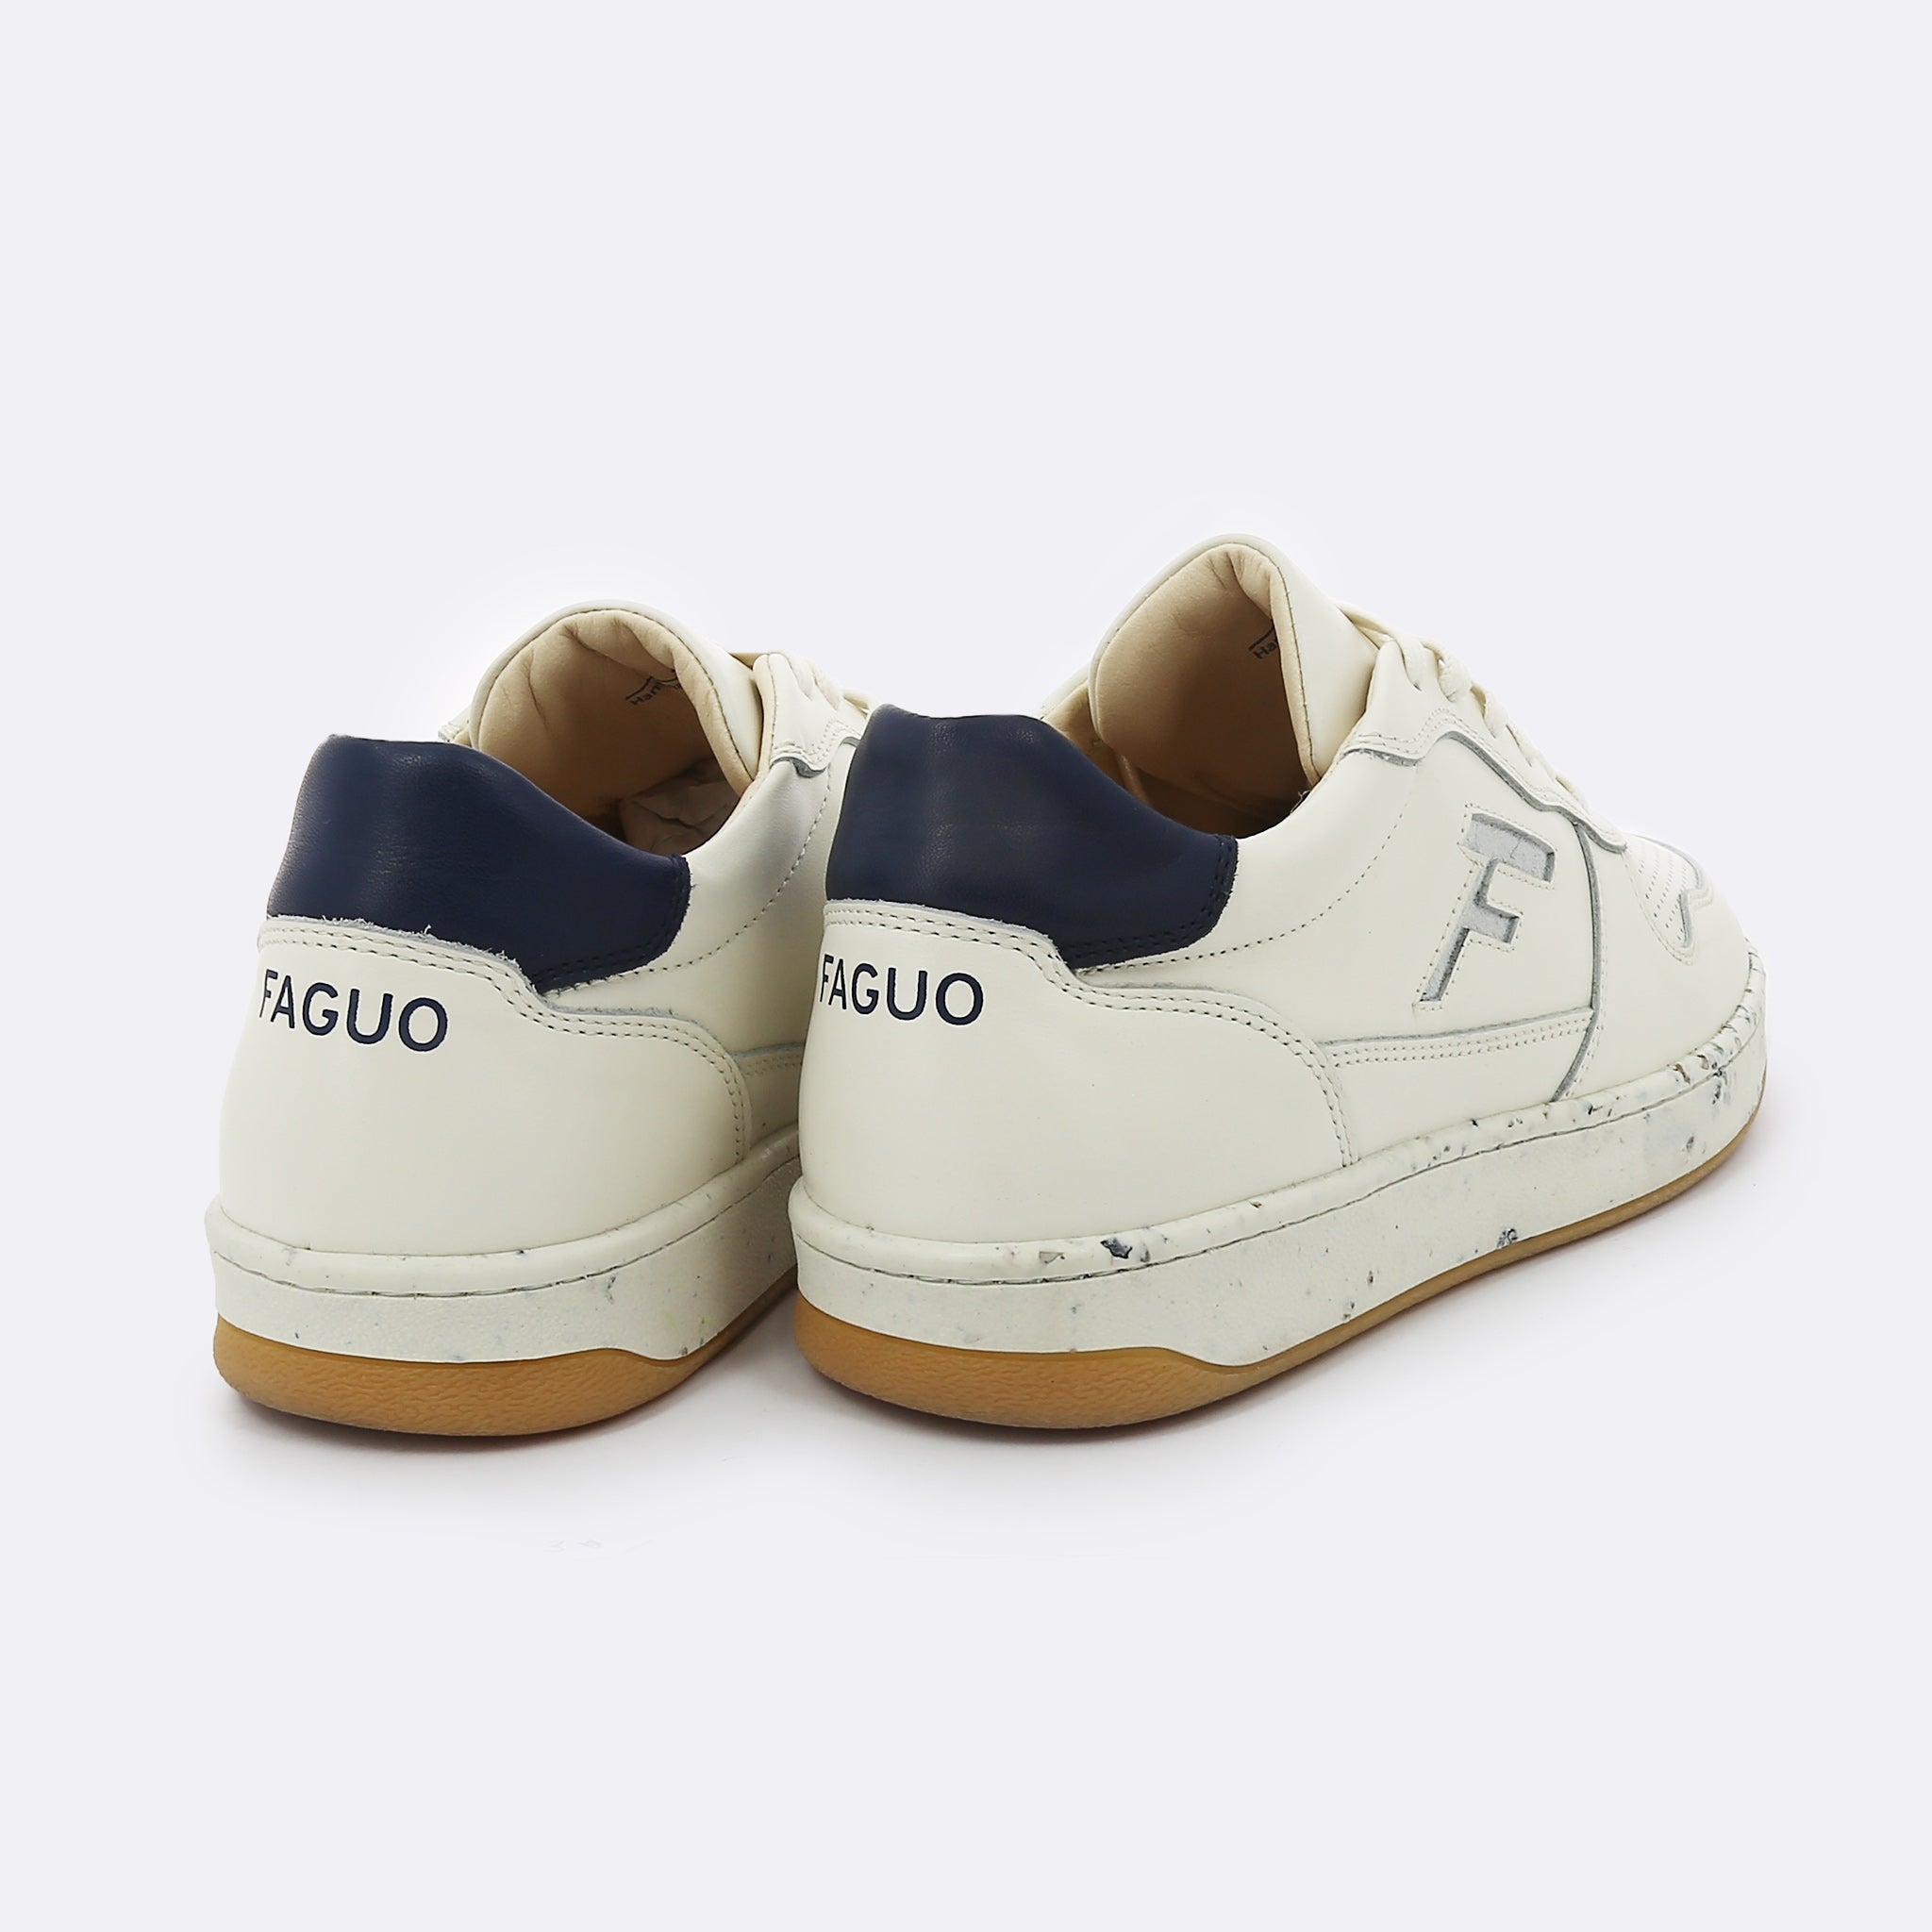 Faguo - Alder Ecru & Navy Sneakers in Recycled Tennis Balls - The Good Chic